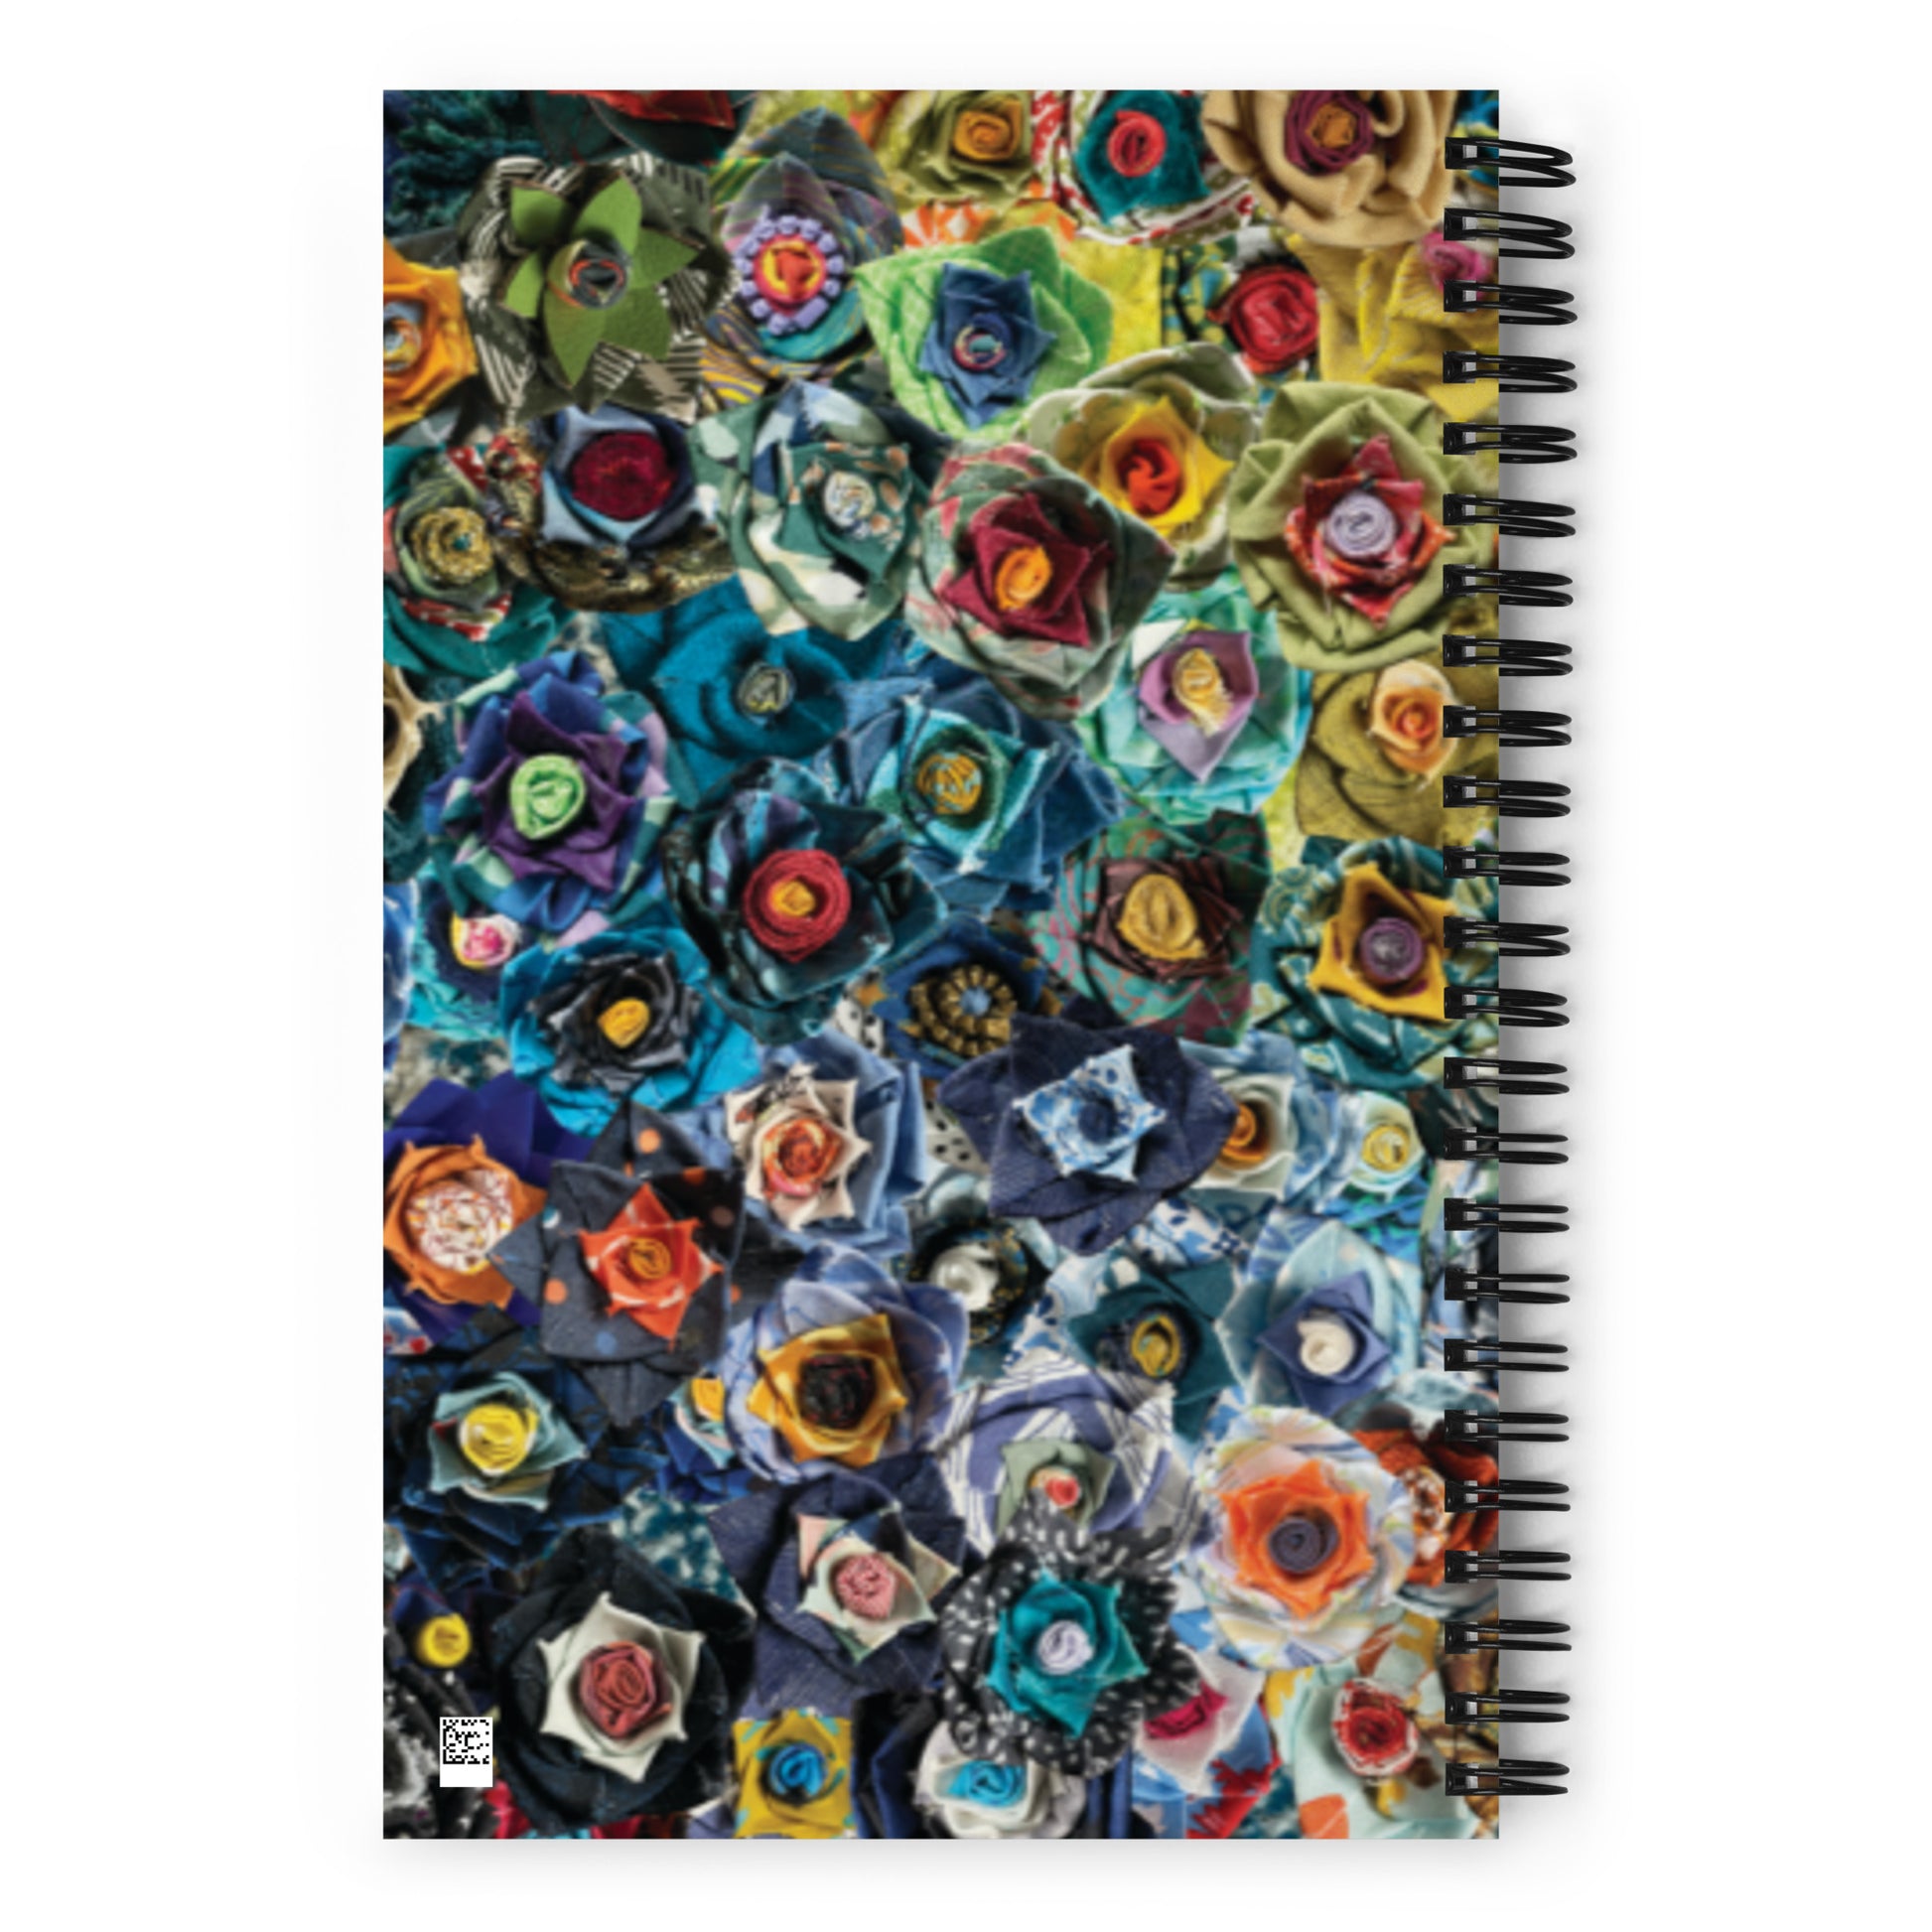 Spiral bound notebook with a blue and green image of fabric flowers